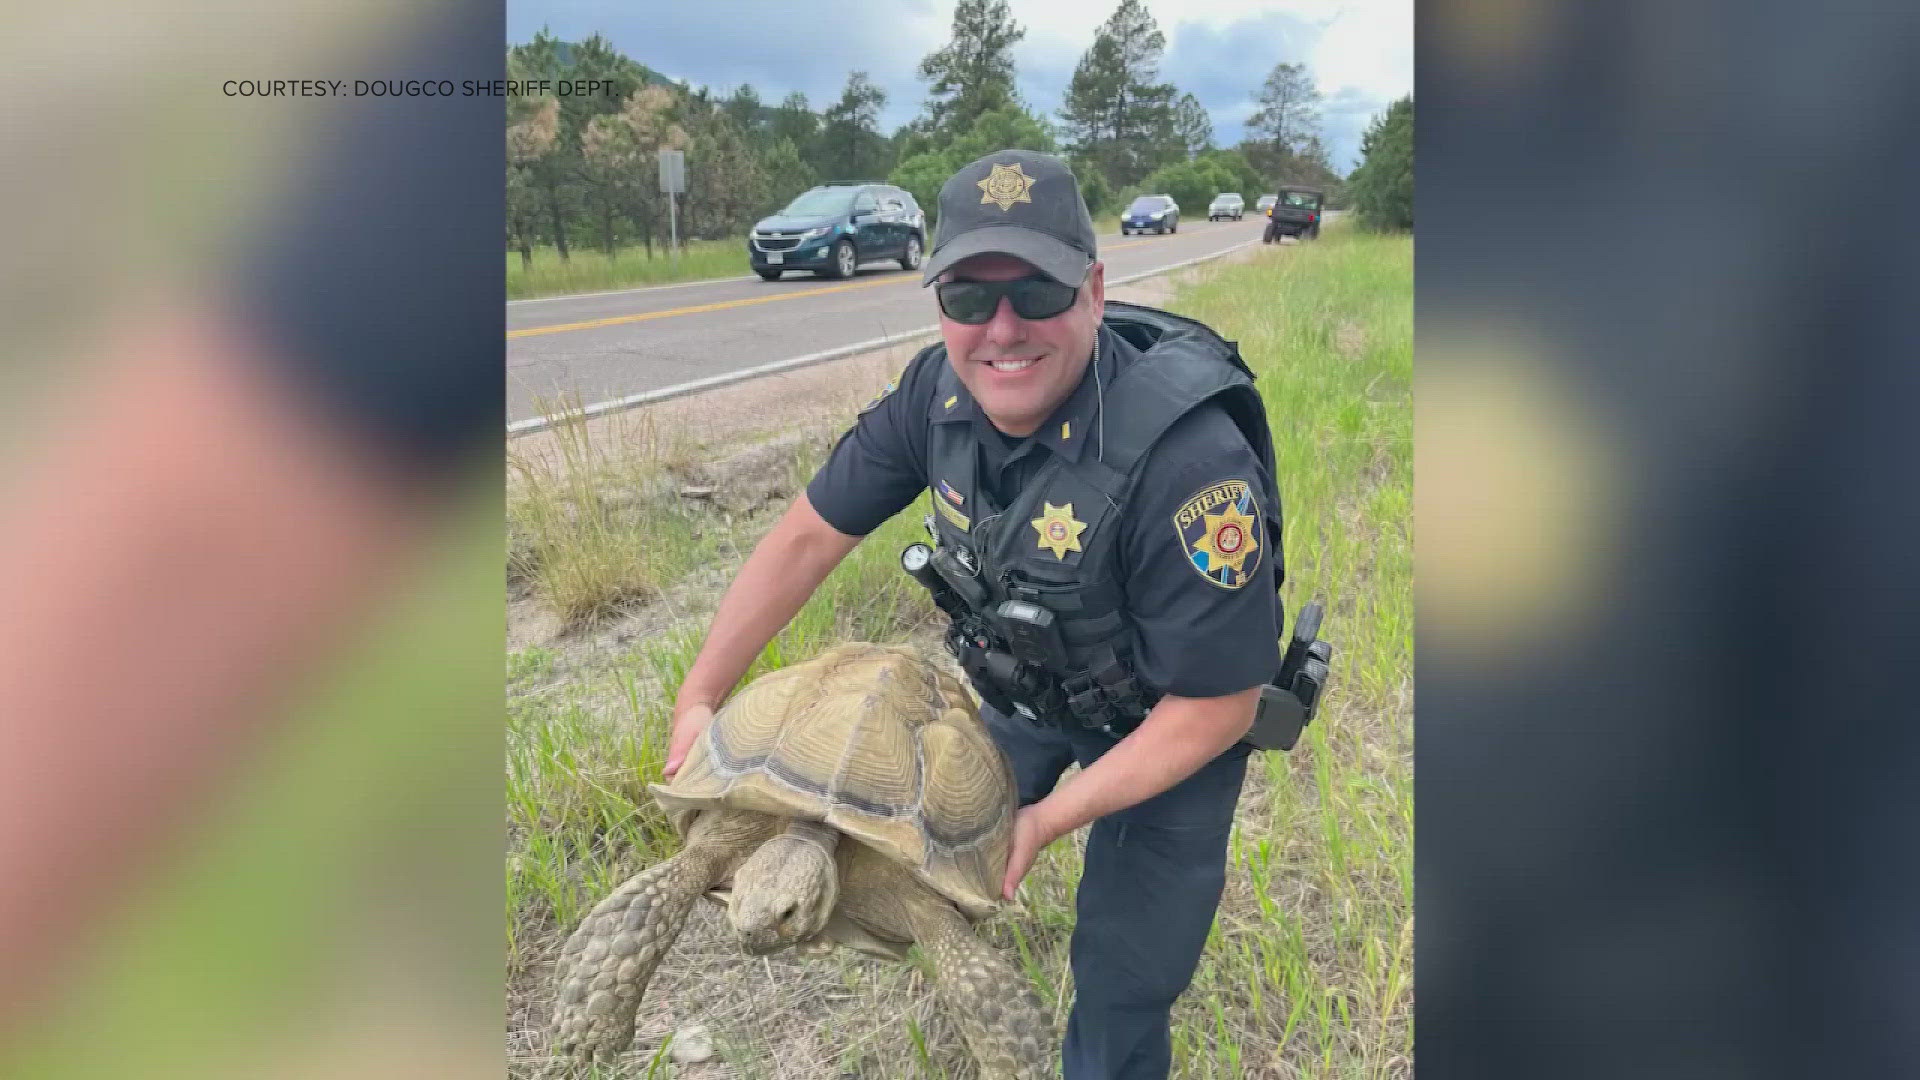 Deputies said a Good Samaritan helped a tortoise to safety along a busy road with traffic from the Colorado Renaissance Festival.